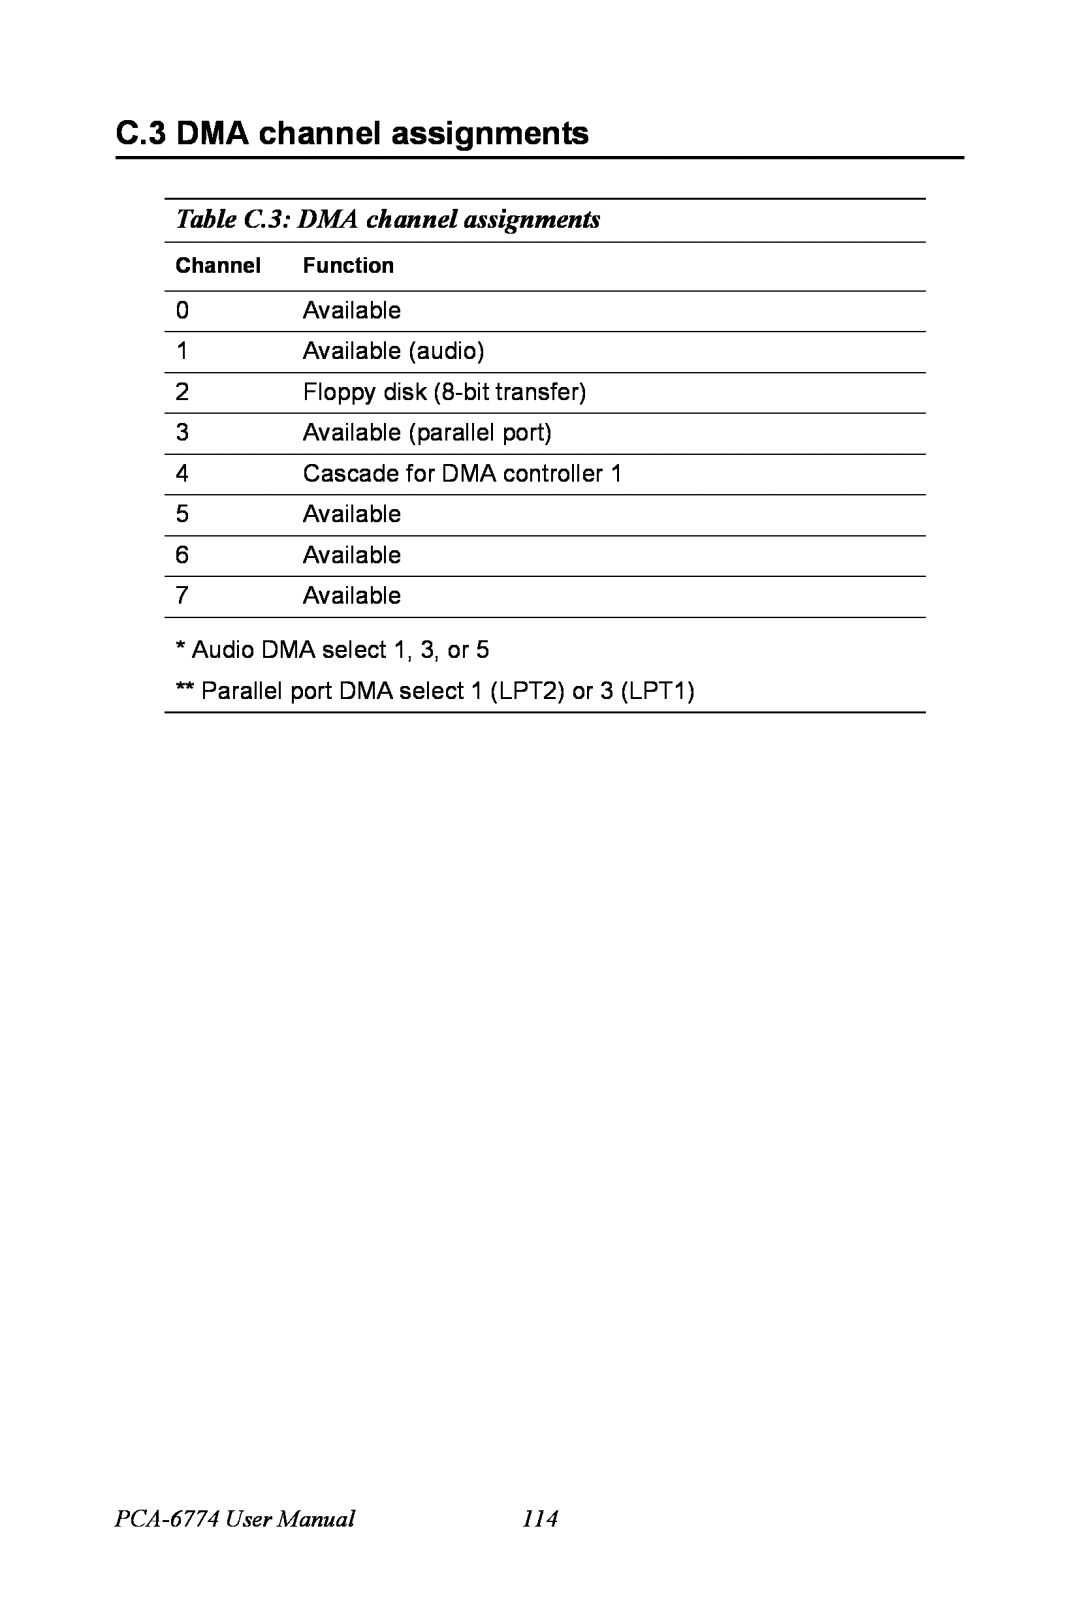 Advantech user manual Table C.3 DMA channel assignments, PCA-6774 User Manual, Channel Function 